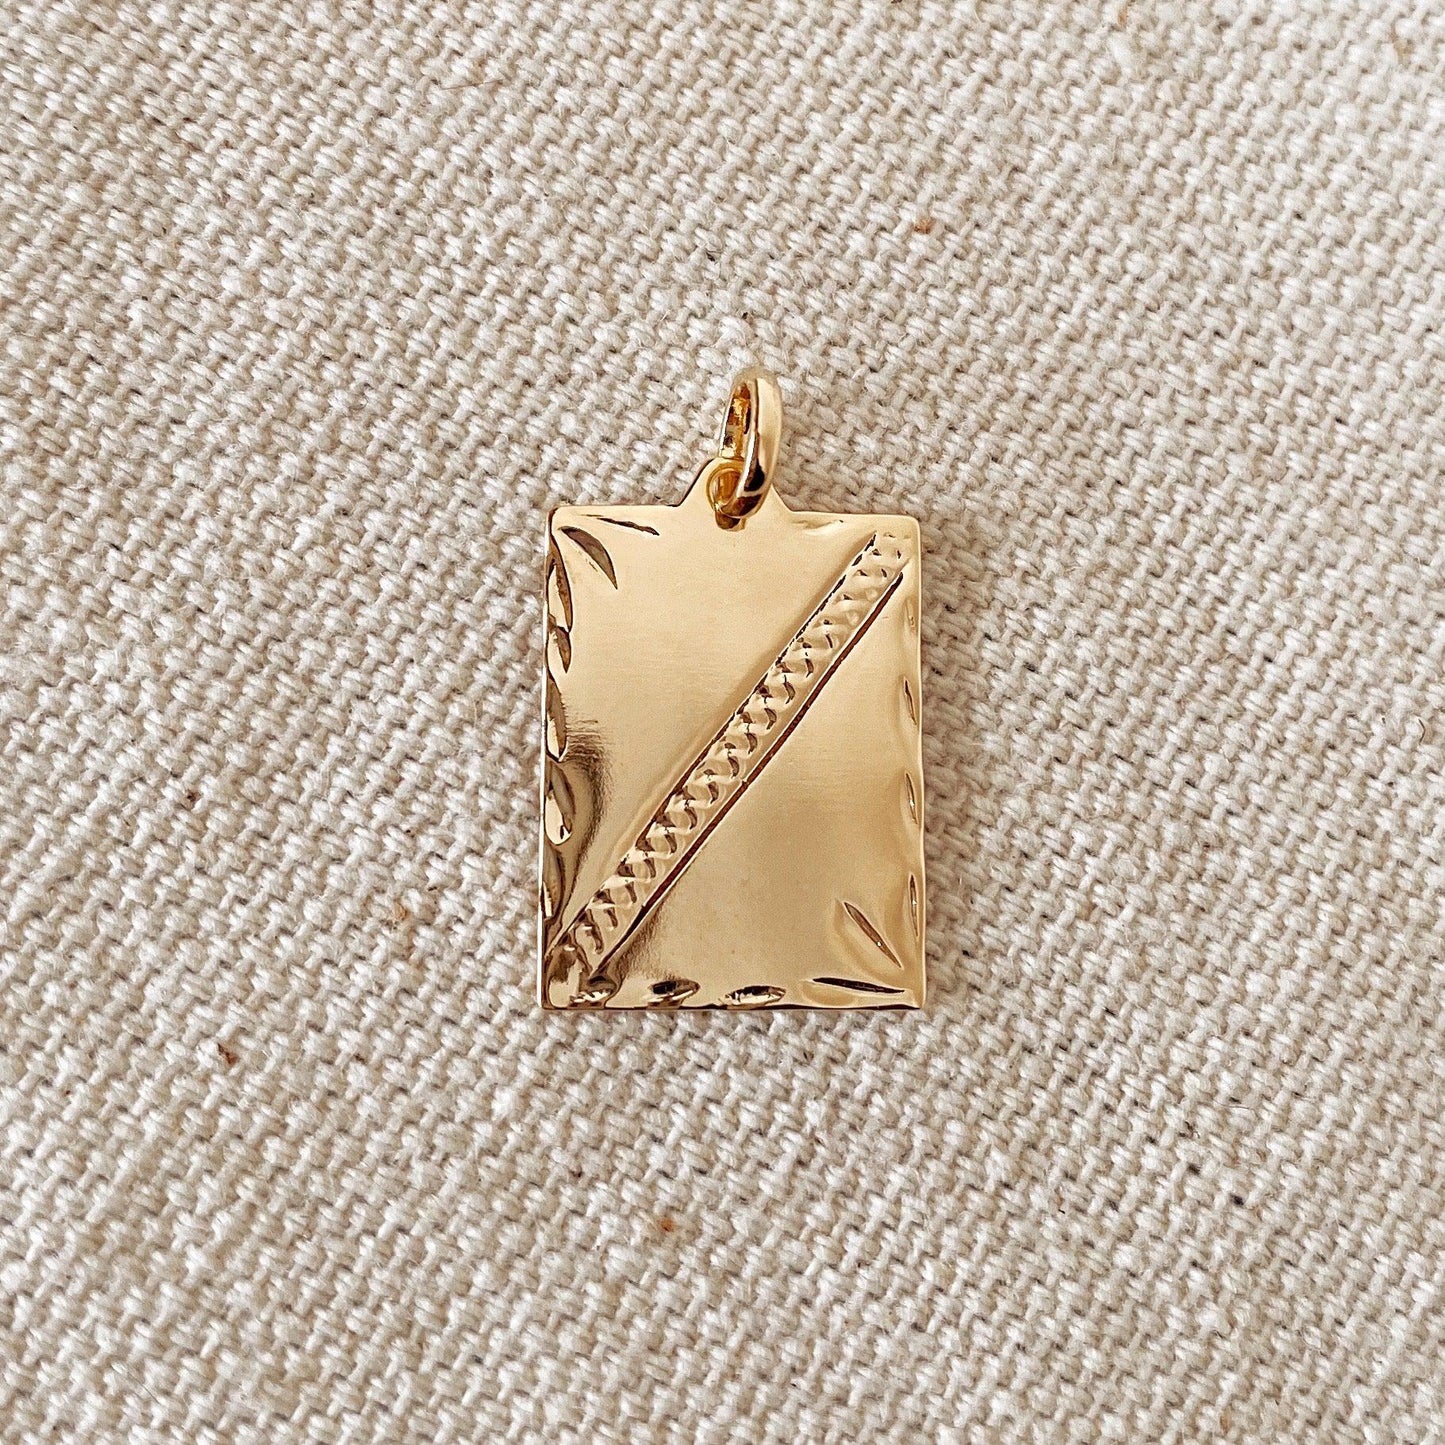 GoldFi 18k Gold Filled Tag Plate Pendant Featuring Diamond Cut Borders and Crossing Texture